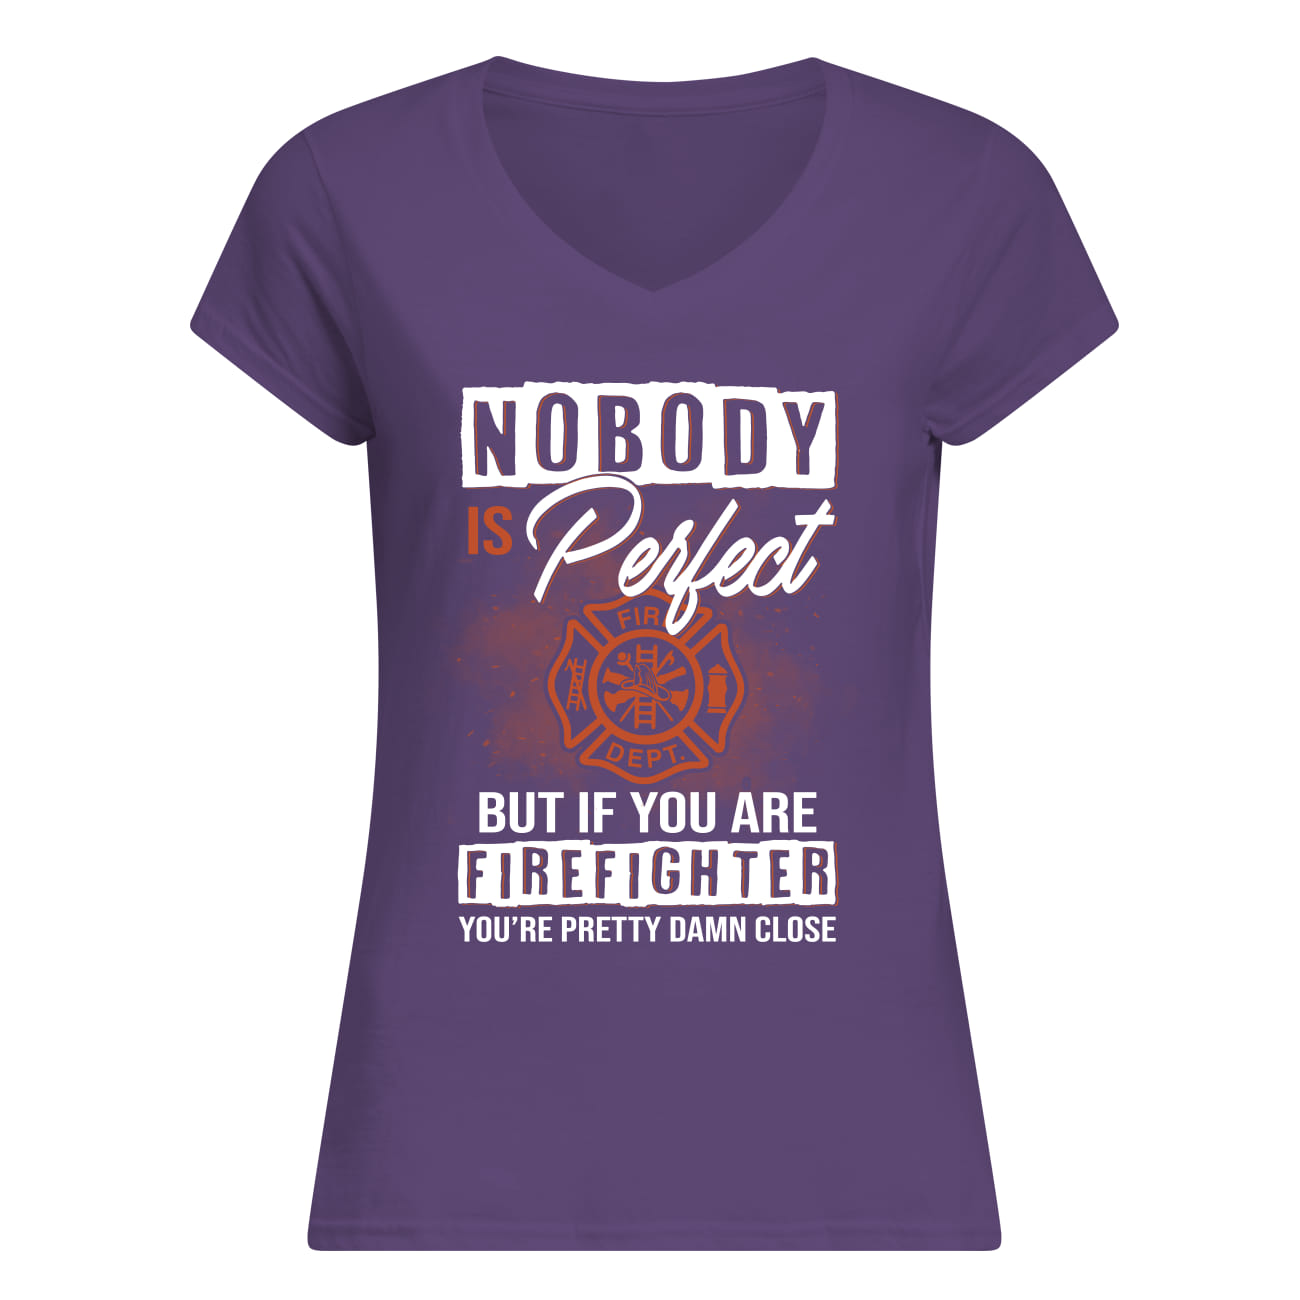 Nobody is perfect but if you are firefighter you're pretty damn close lady v-neck